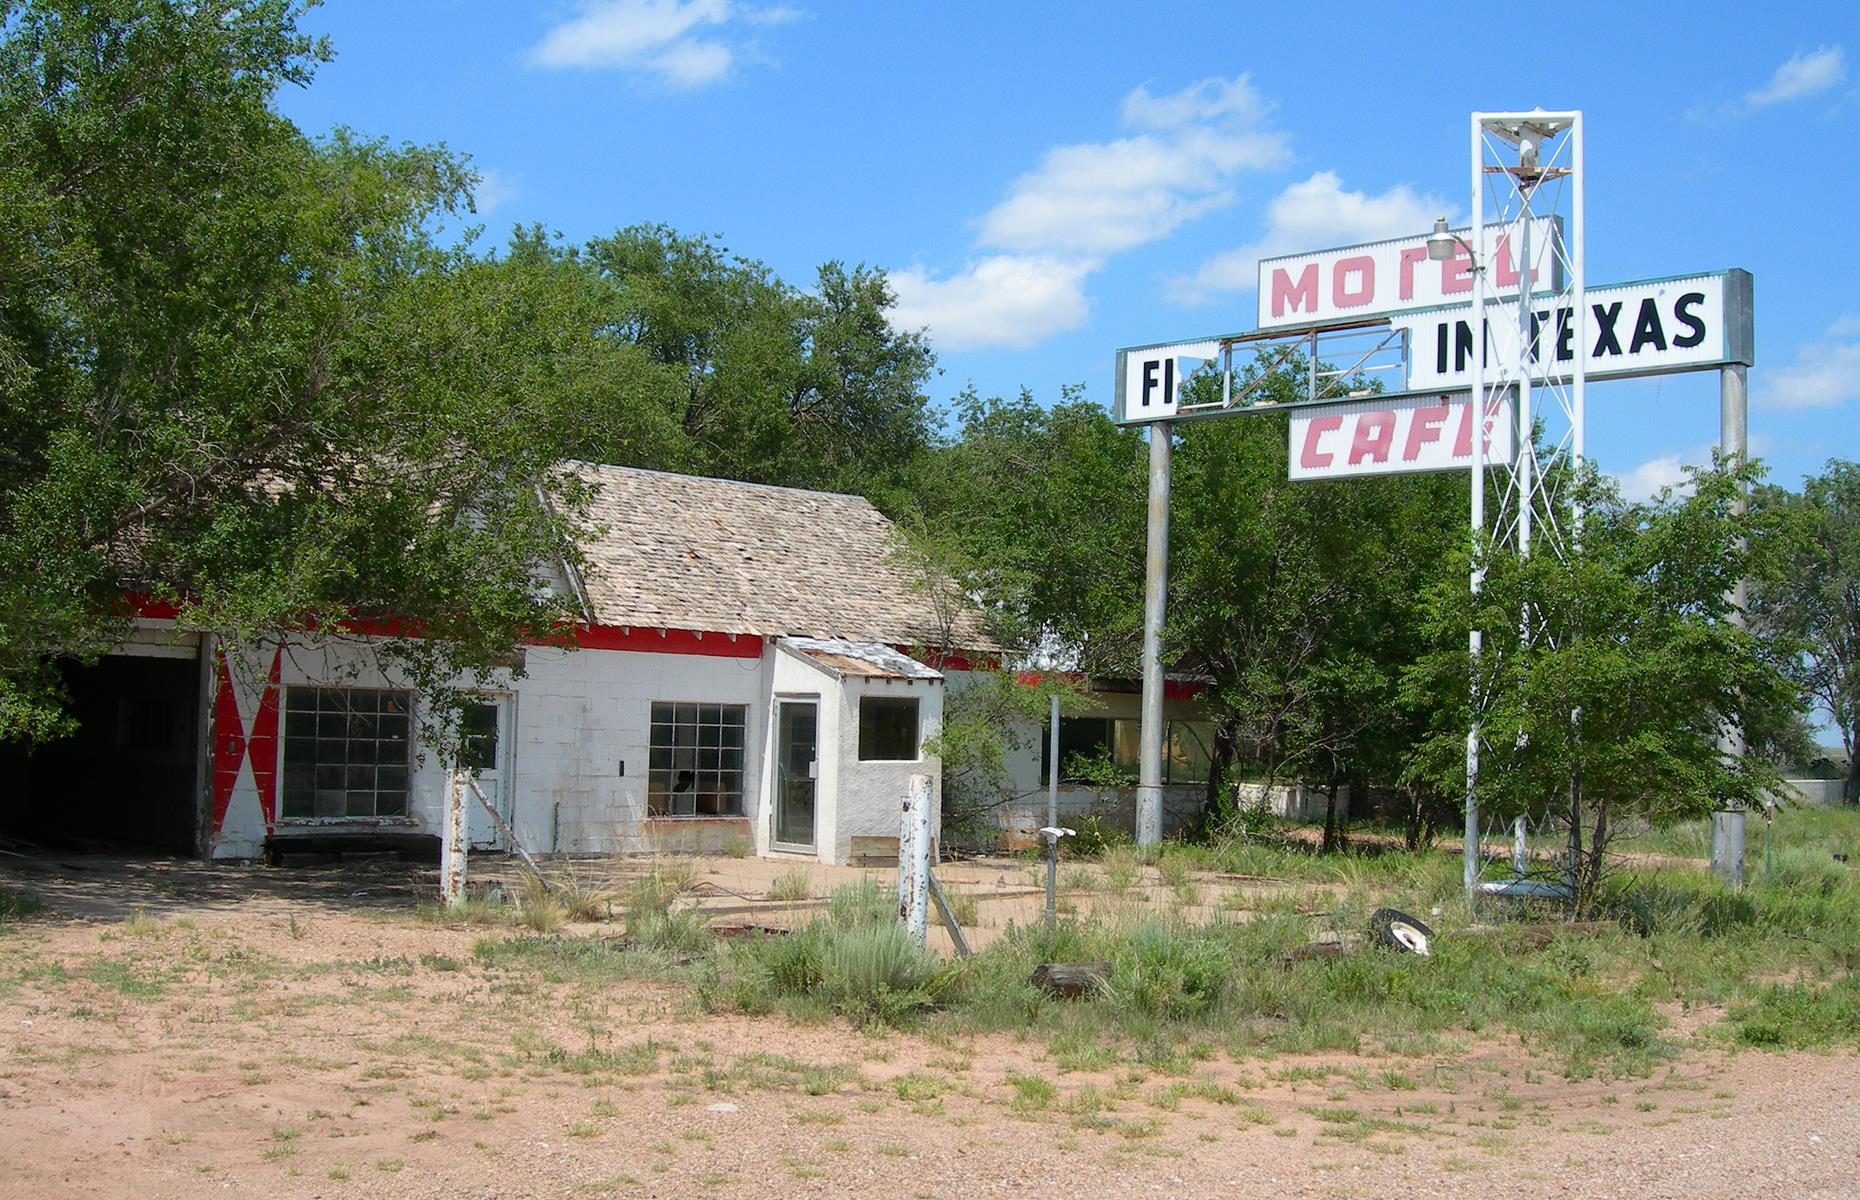 <p>Uniquely positioned on the state line between Texas and New Mexico, Glenrio began life as a railroad town in 1903. A stopping point on the Rock Island and Pacific Road, the quaint town was once home to a motel, grocery stores, service stations and cafes.</p>